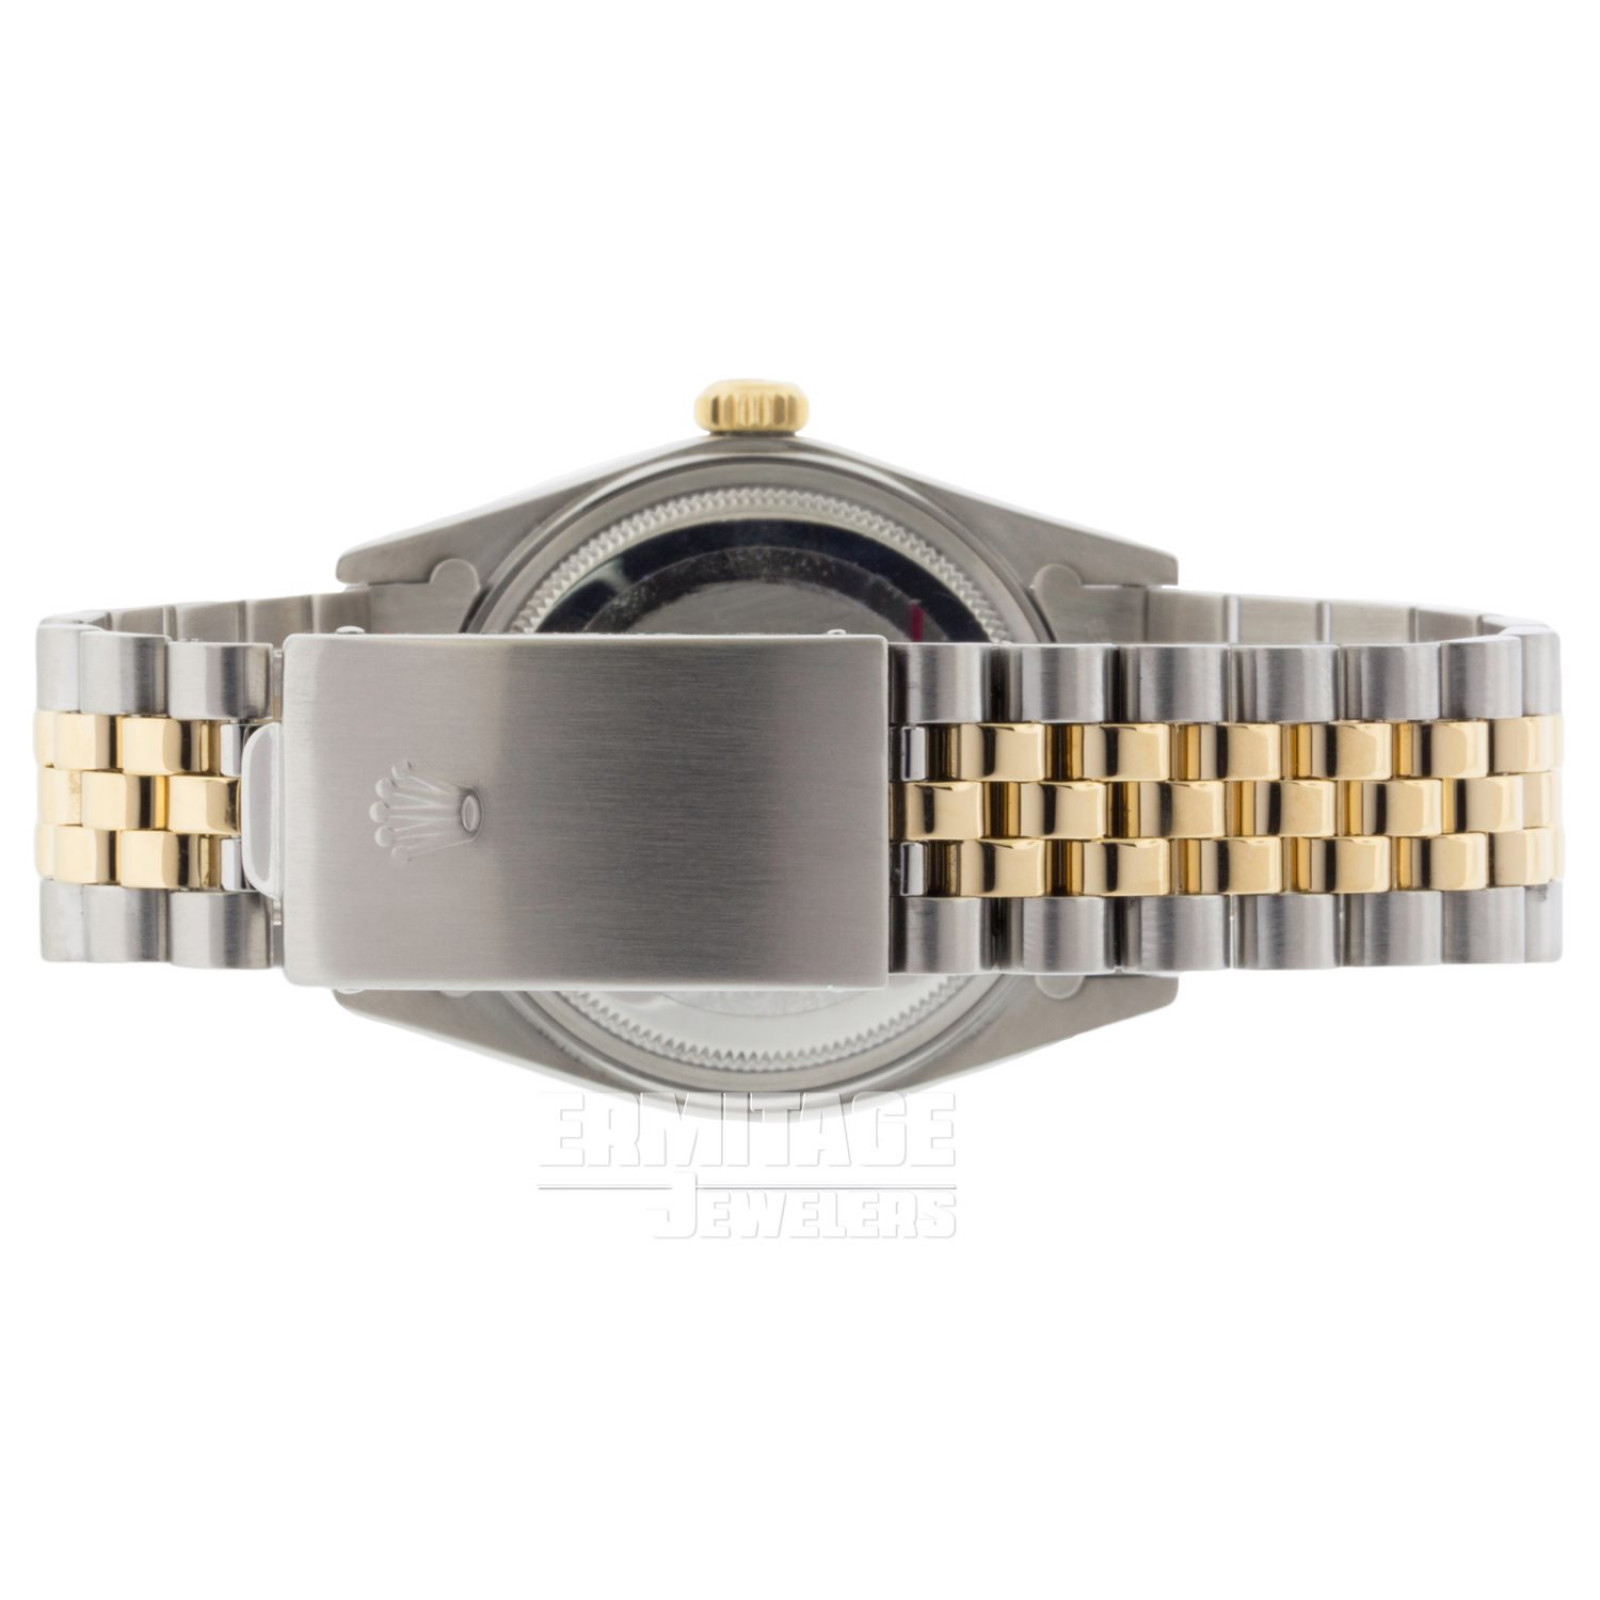 36 mm Rolex Datejust 16013 Gold & Steel on Jubilee with Black Tapestry Dial